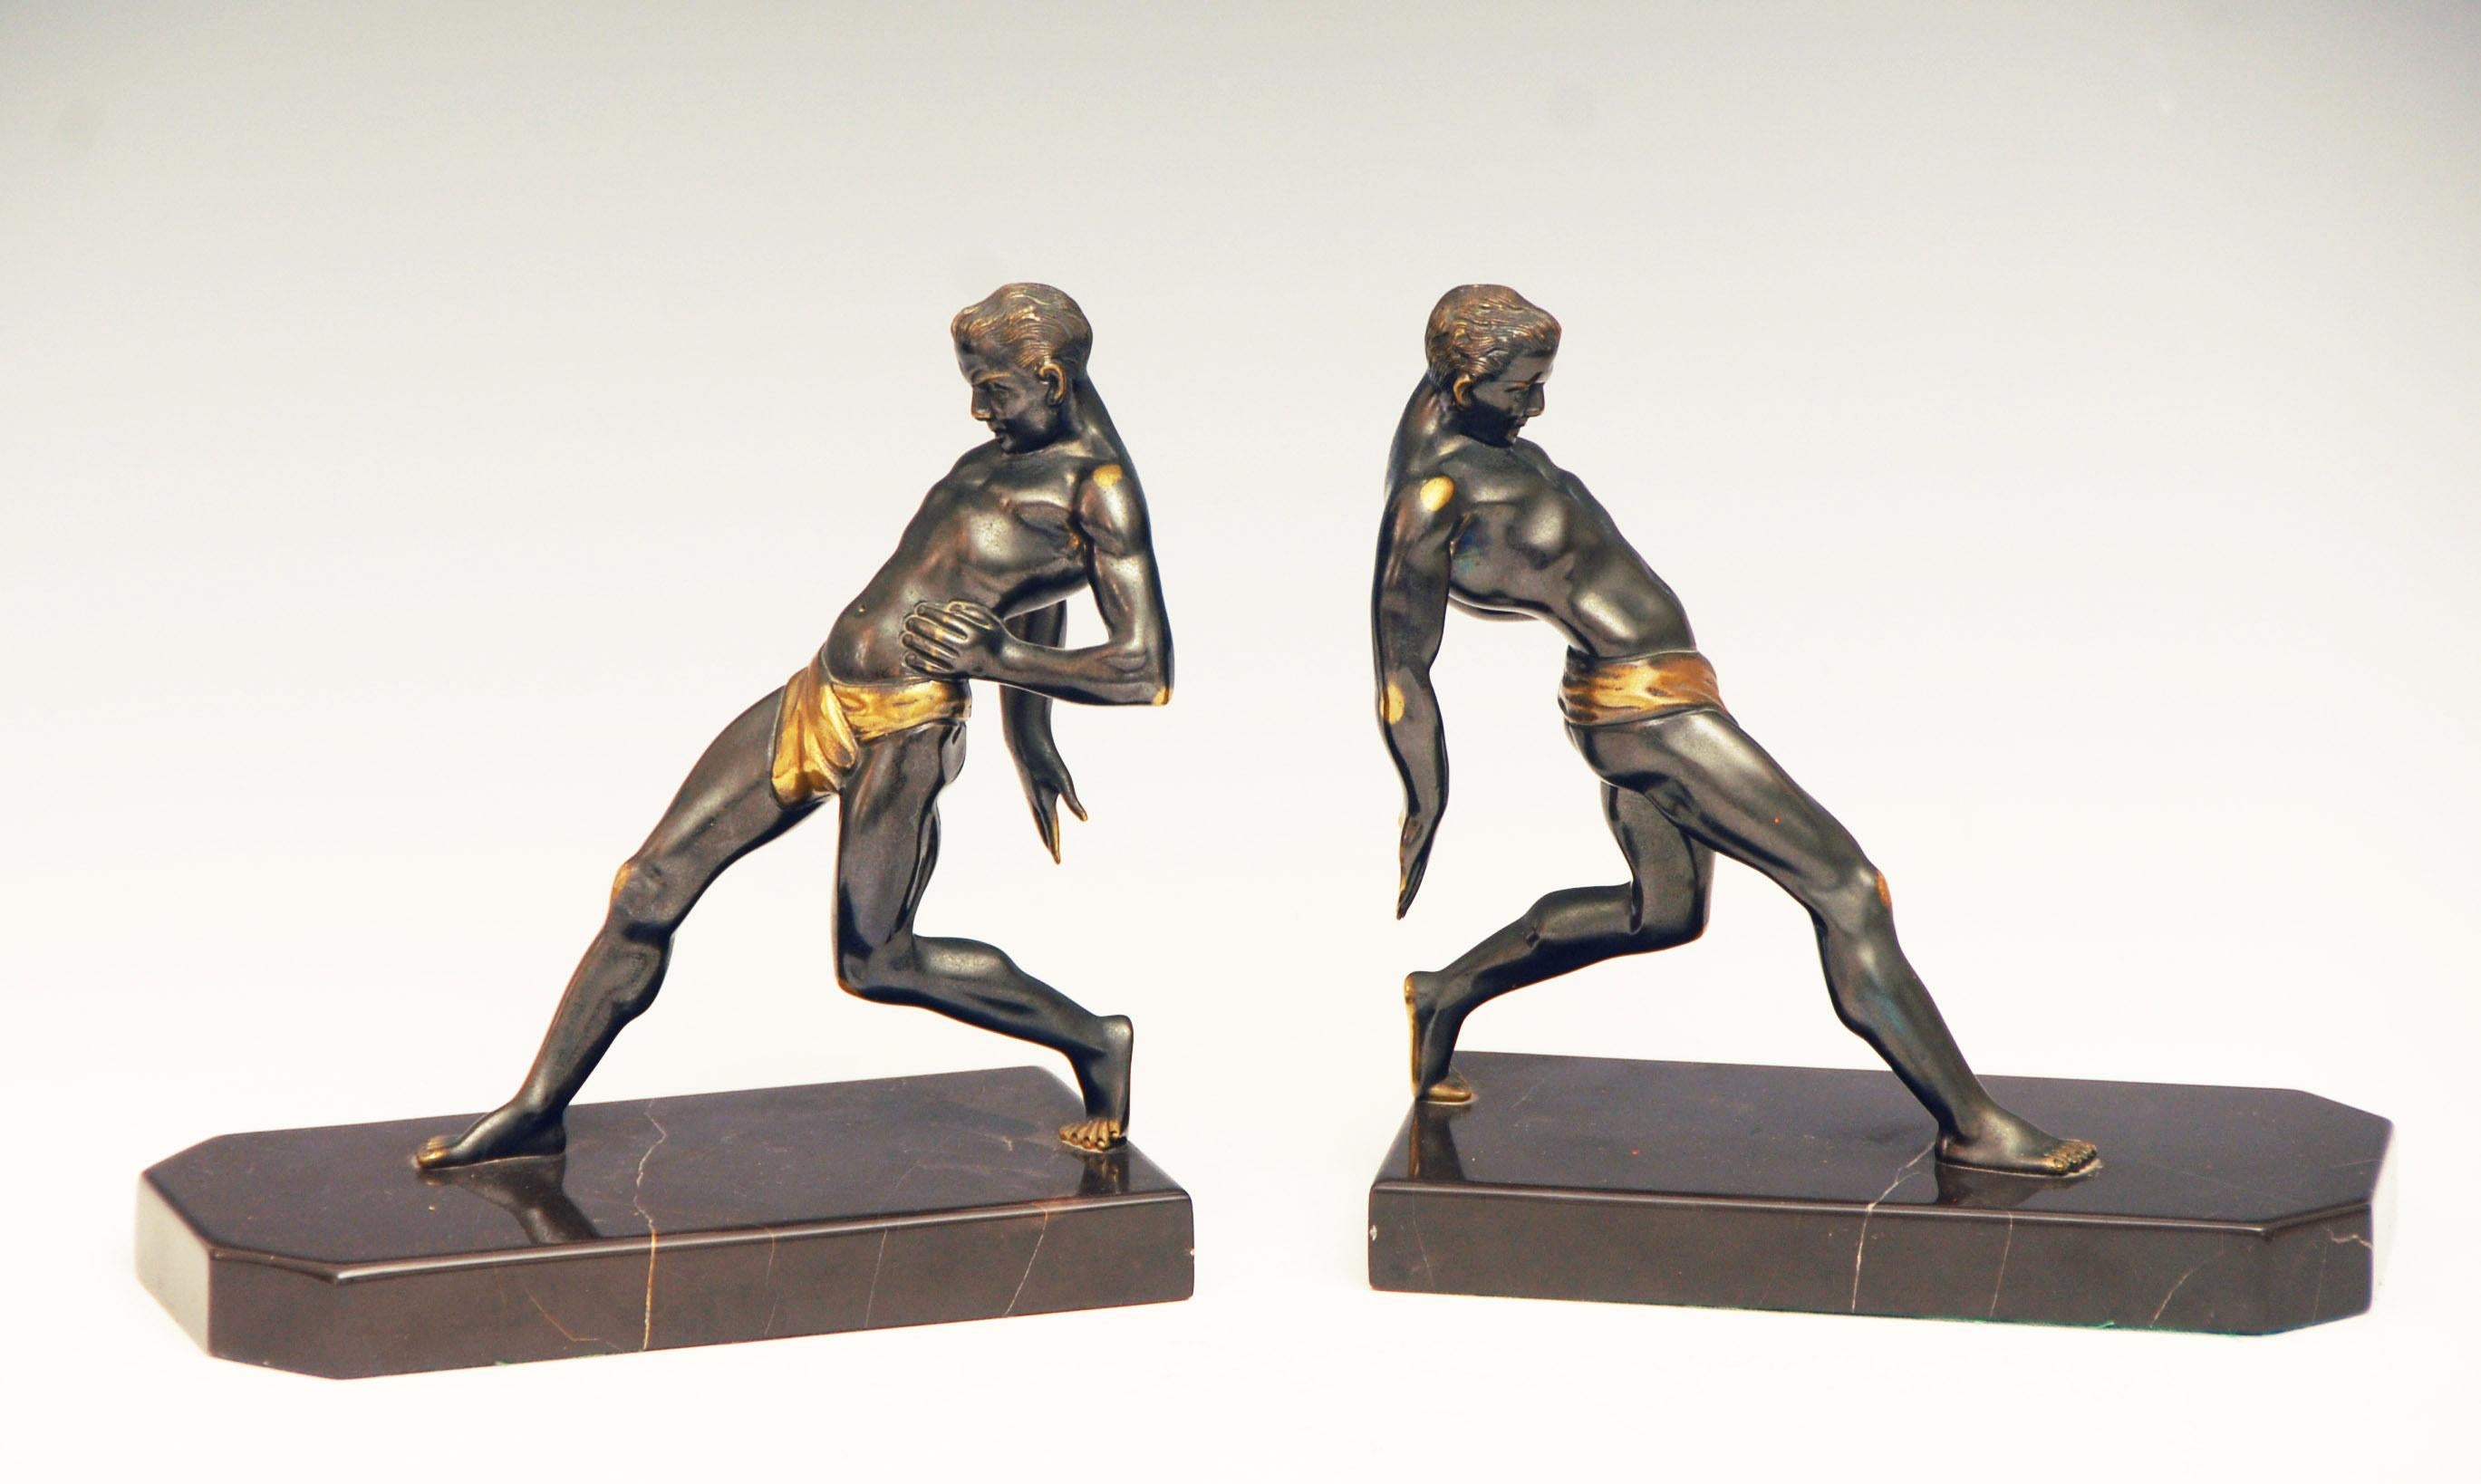 Wonderful large pair of original Art Deco Bookends modeled as Olympian athletes. 

Patinated Bronze with very fine detail in the casting, very heavy substantial pieces.

Very good condition, price includes free shipping to anywhere in the world.